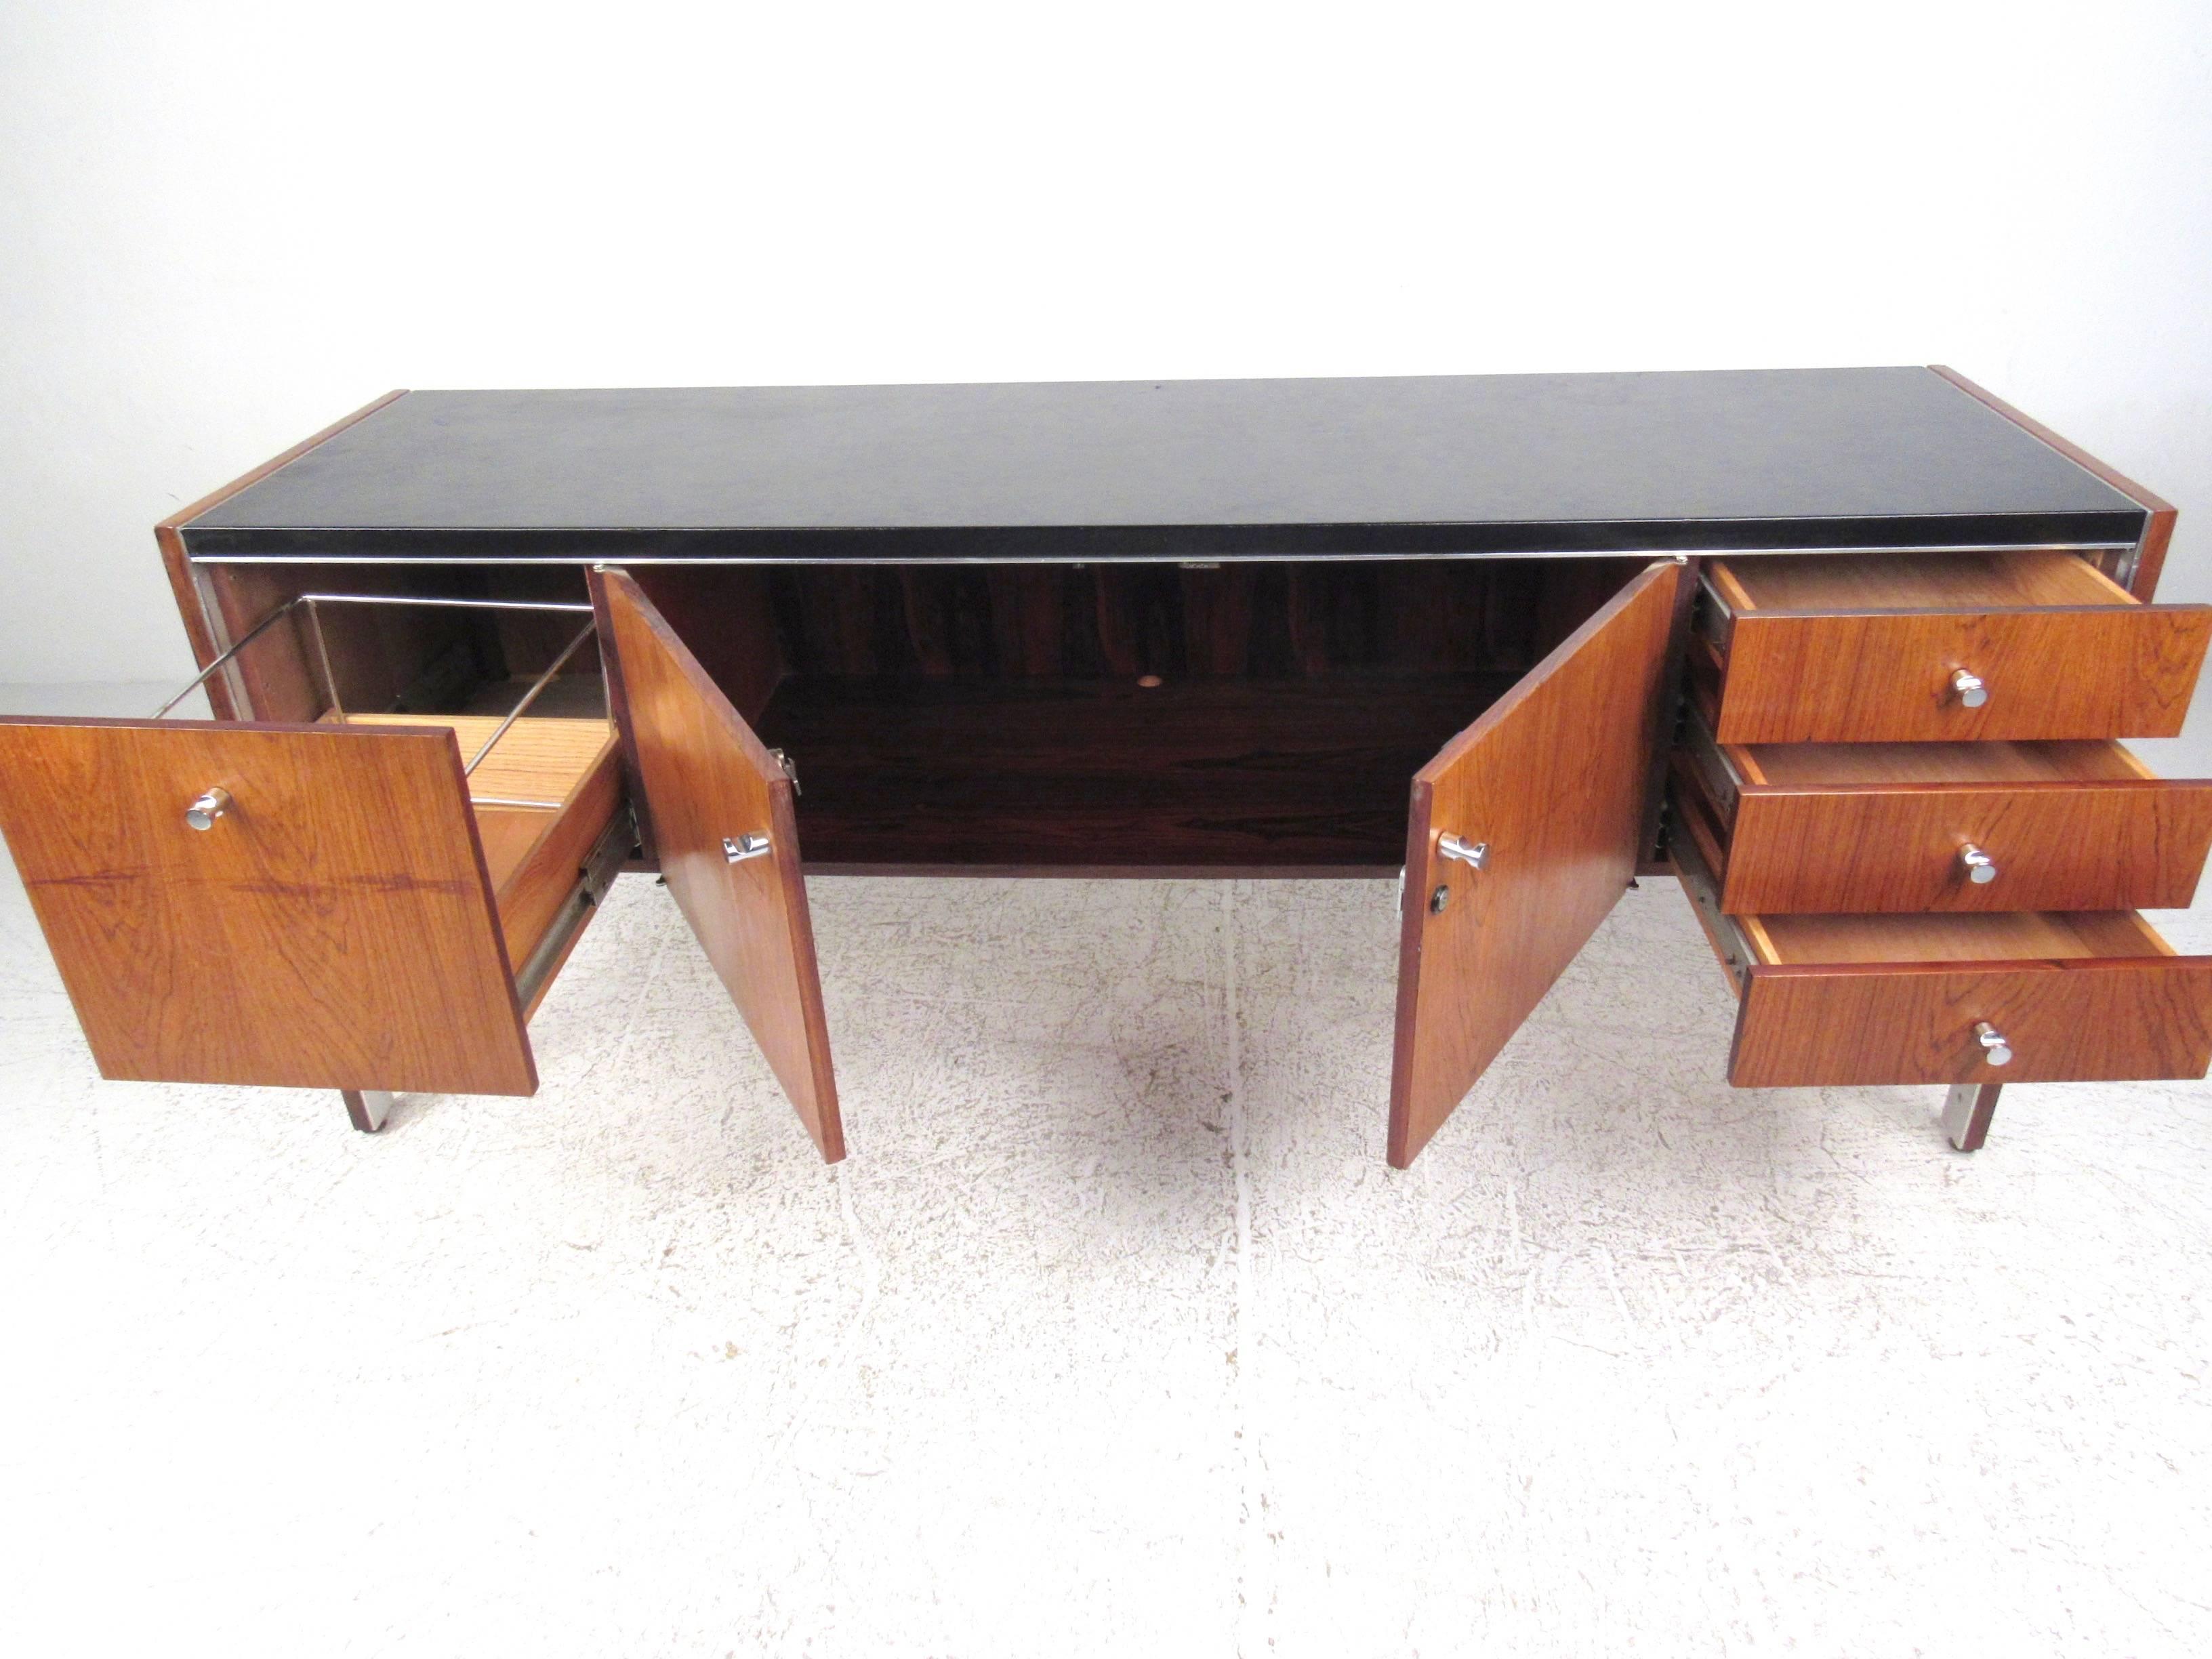 This stunning vintage credenza showcases the fantastic Mid-Century designs of Herman Miller for Biltrite of Canada. Unique late 1960s piece features a leather top and unique chrome trim. Spacious storage cabinet and additional drawers make this a